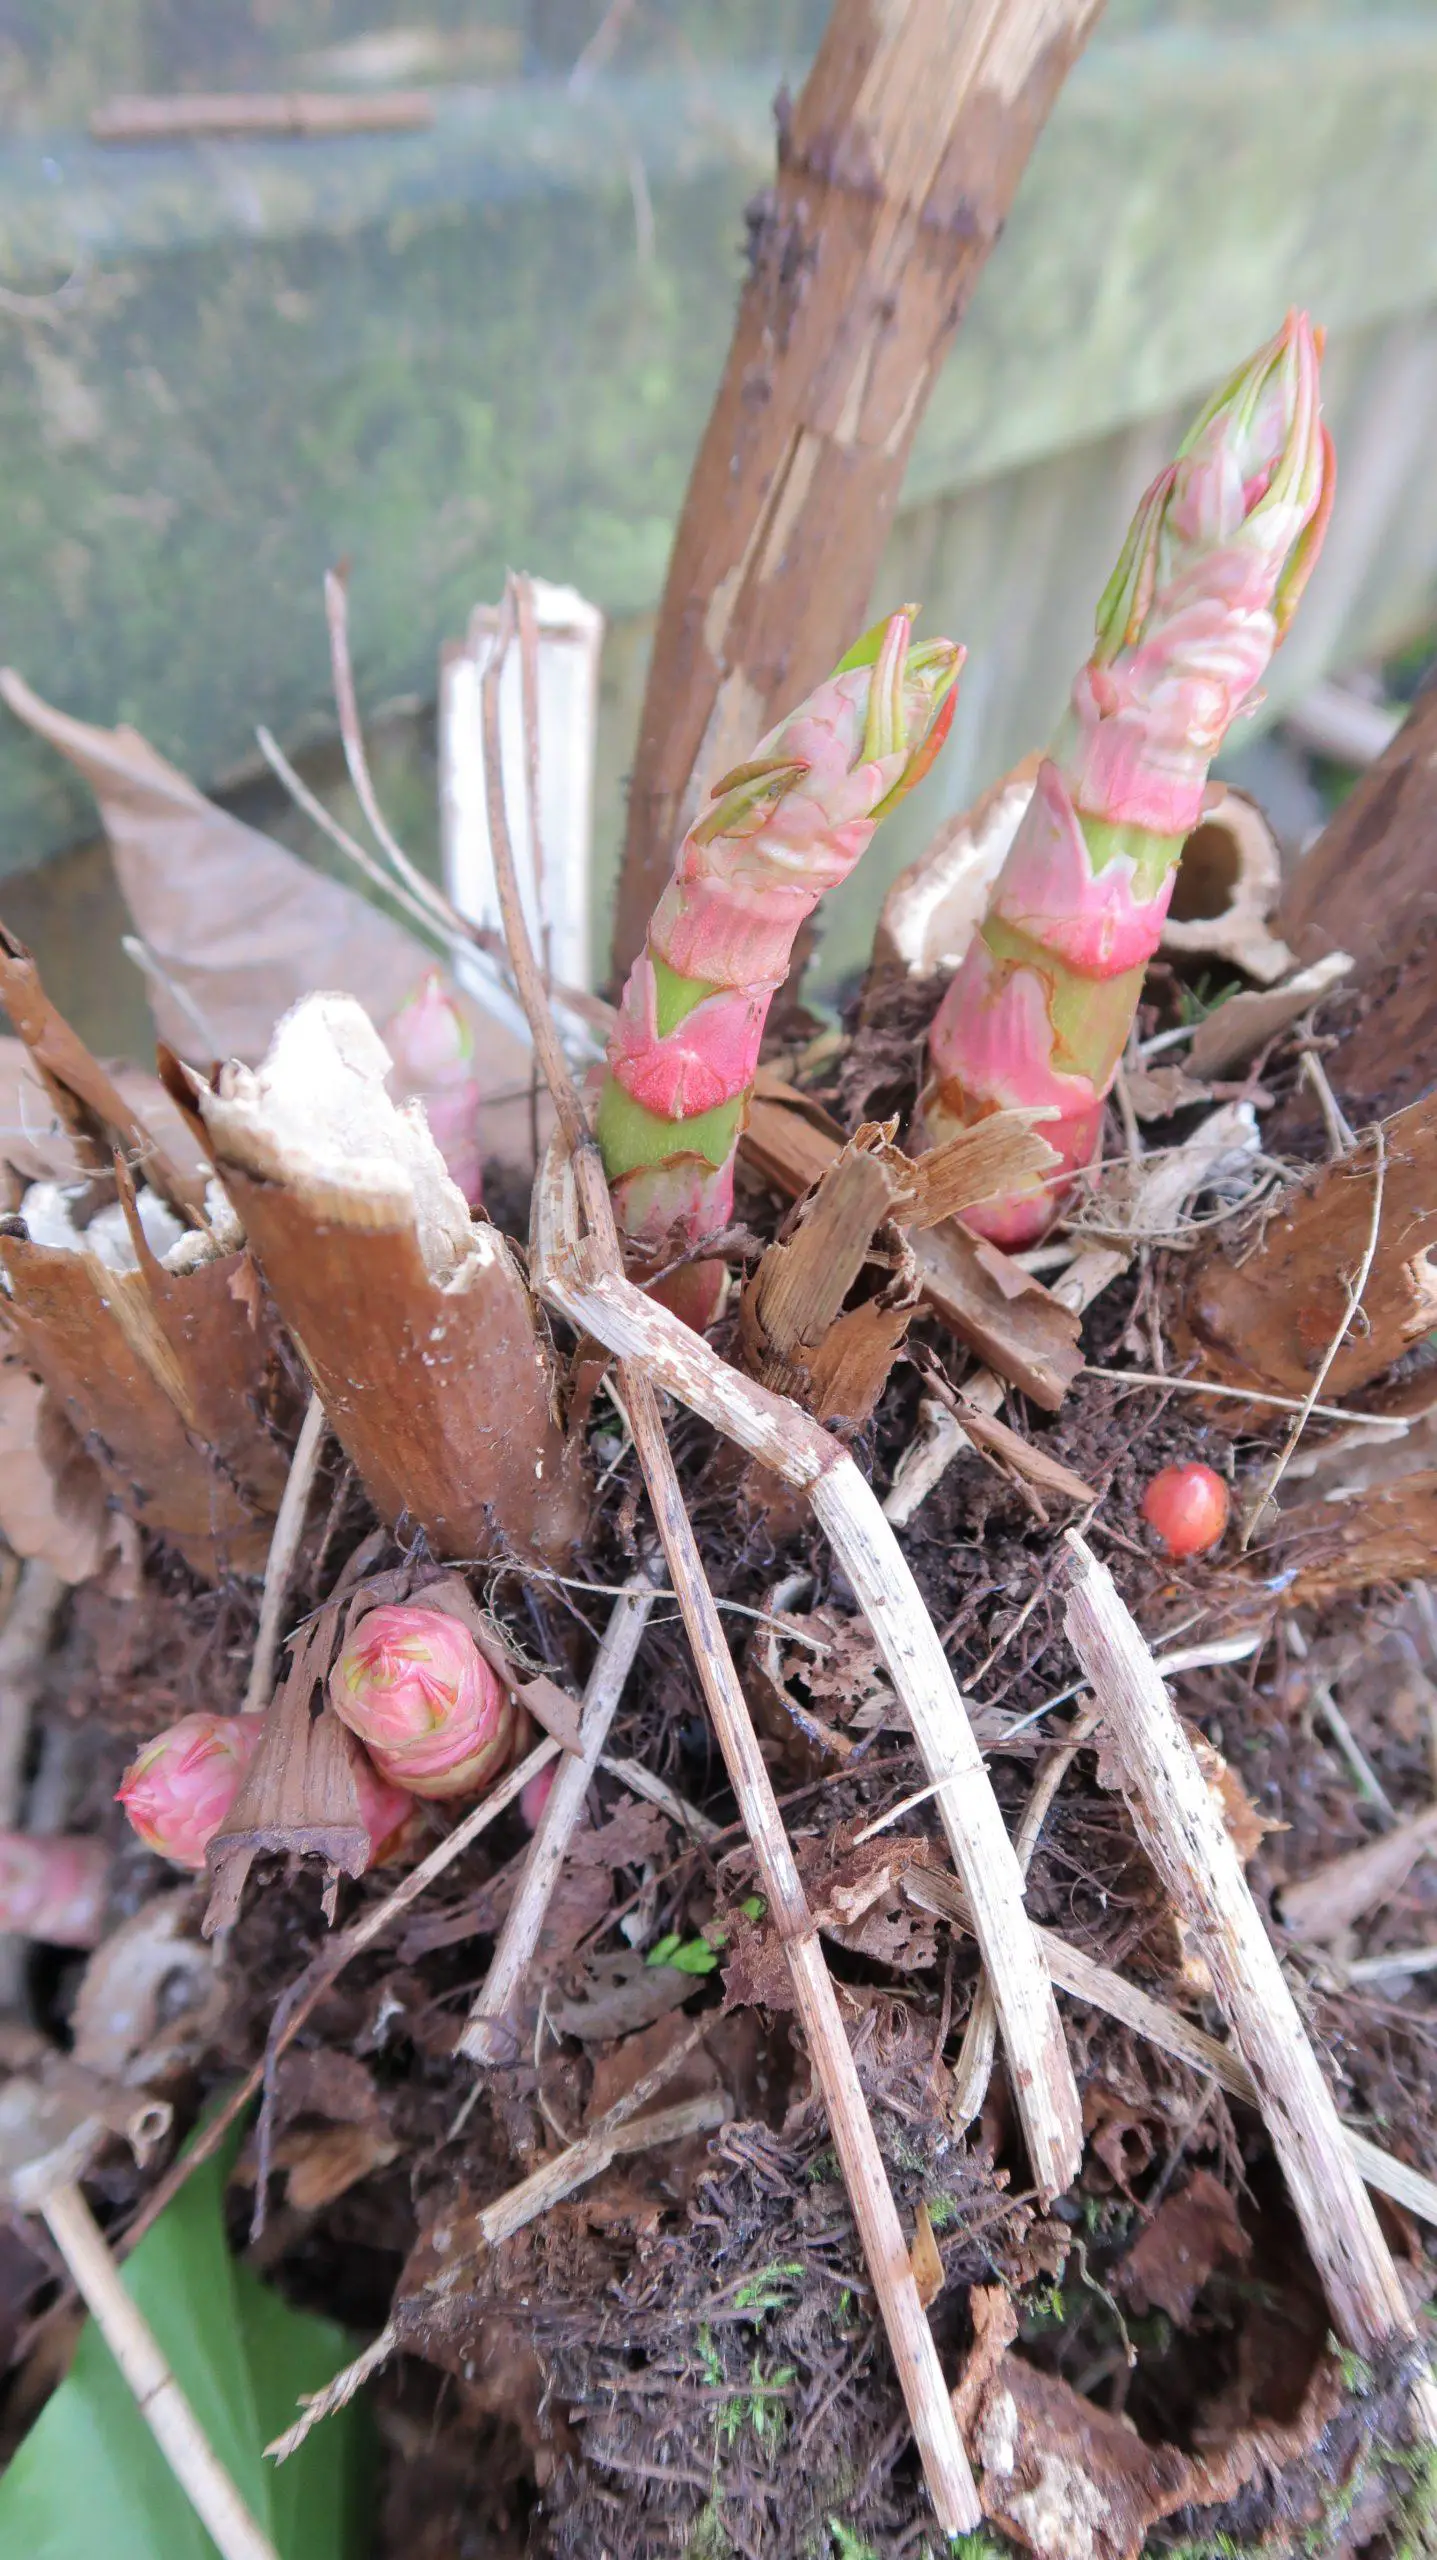 Clumps of Japanese knotweed shoots and buds growing fiercely - identify Japanese knotweed early